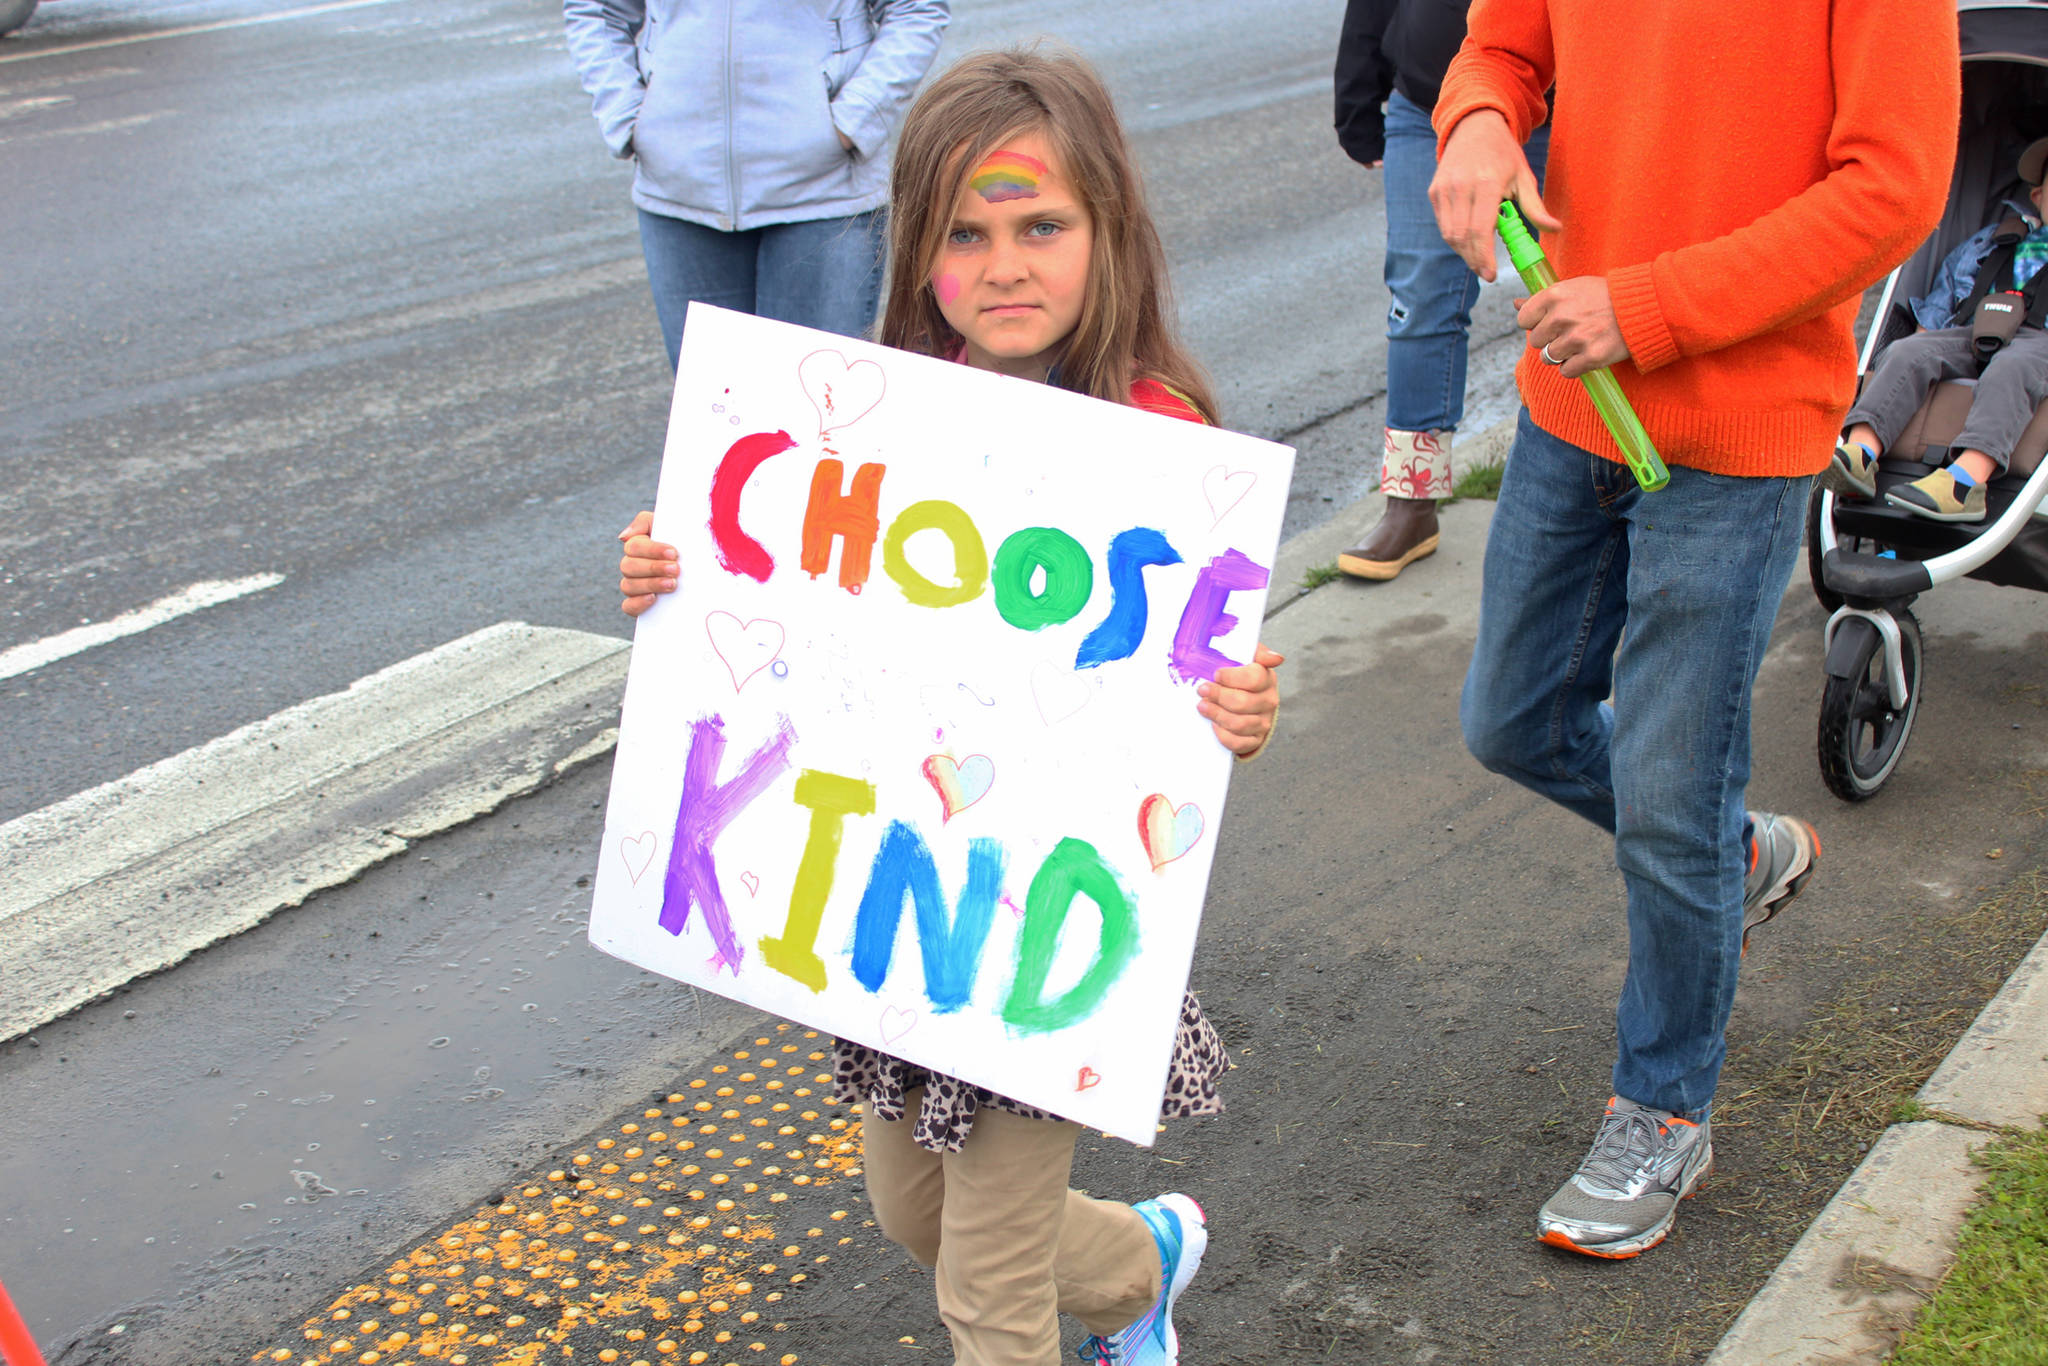 Cate Davis, 8, marches down Pioneer Avenue with sign that reads “Choose kind,” on Saturday, June 23, 2018 during Homer’s first ever Pride March in Homer, Alaska. Davis’ fathers were some of the organizers of the March. (Photo by Megan Pacer/Homer News)